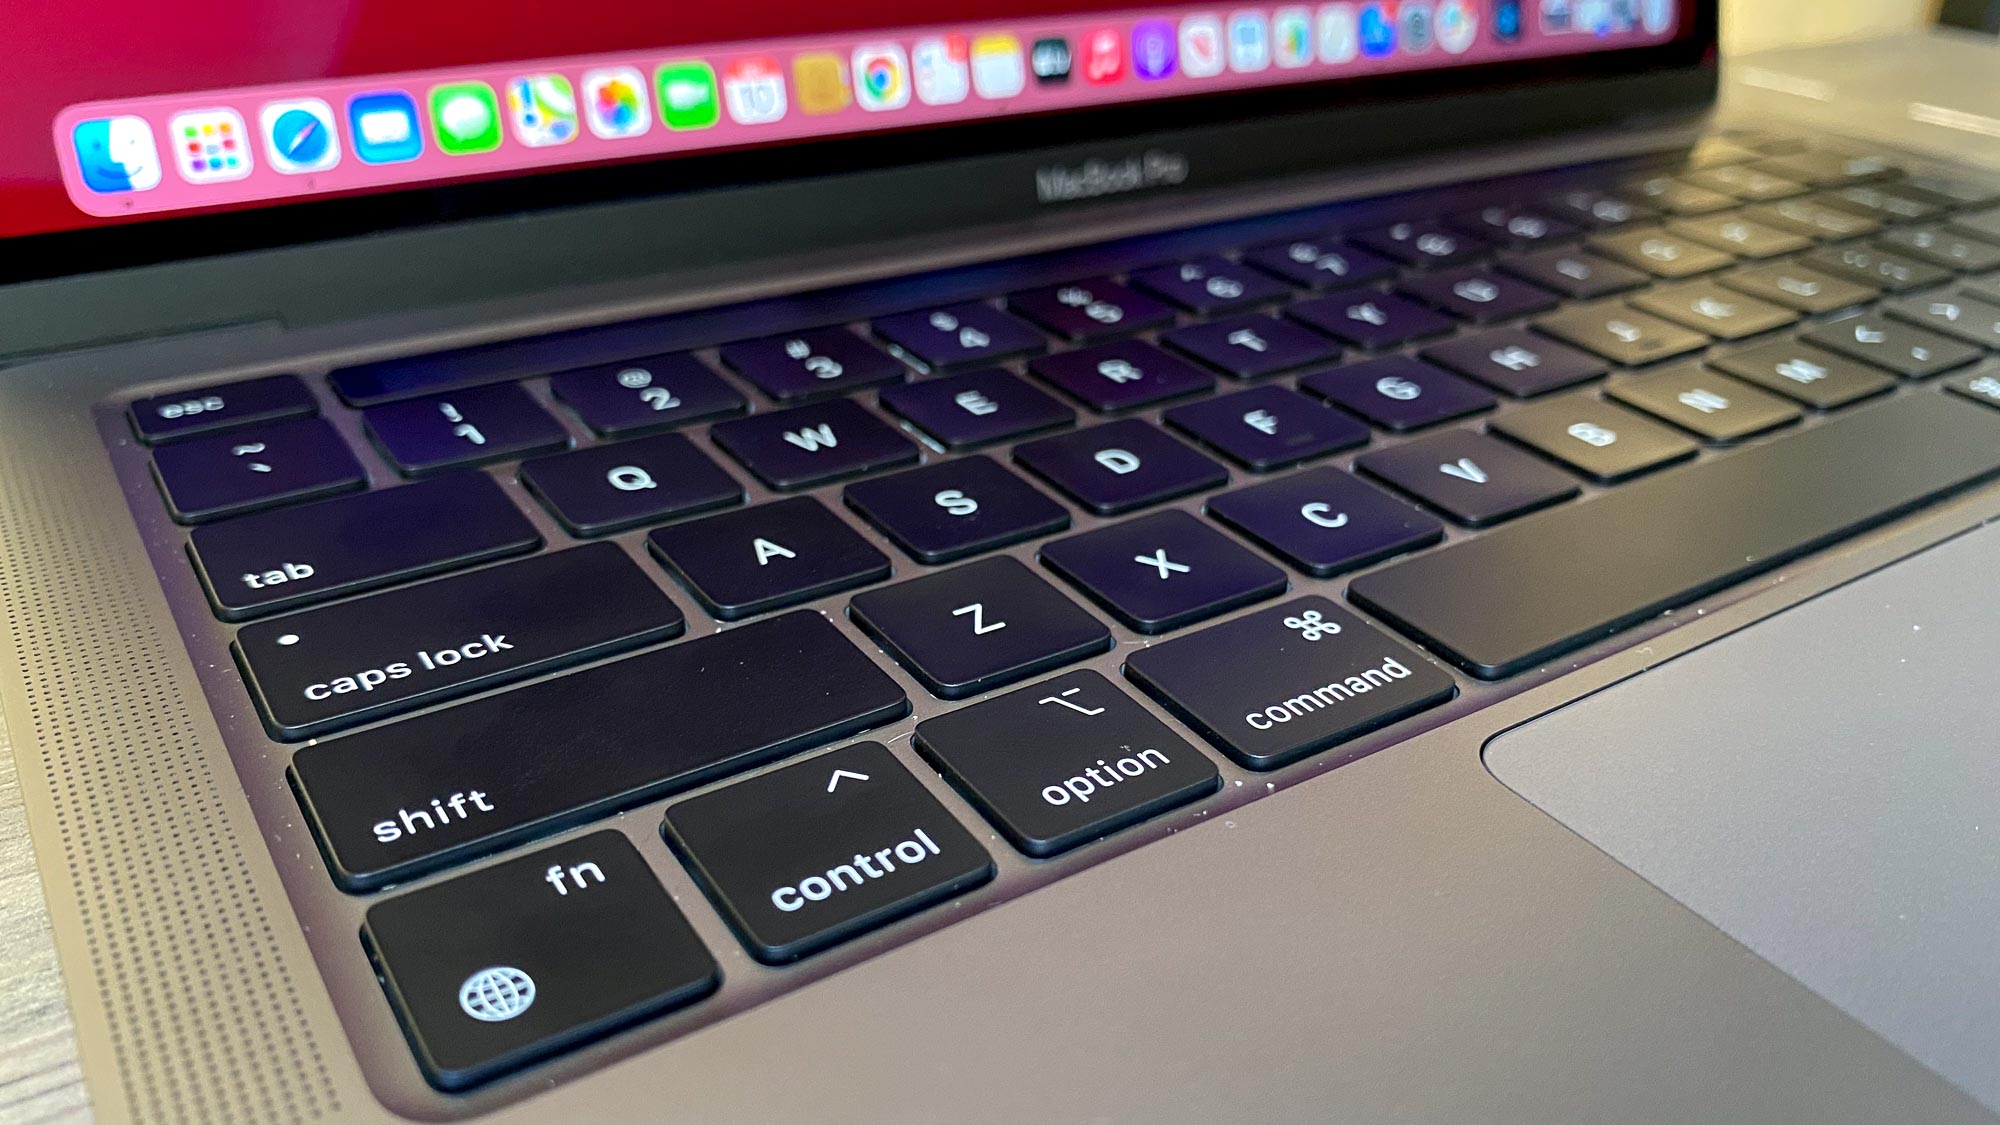 MacBook Pro with M1 review